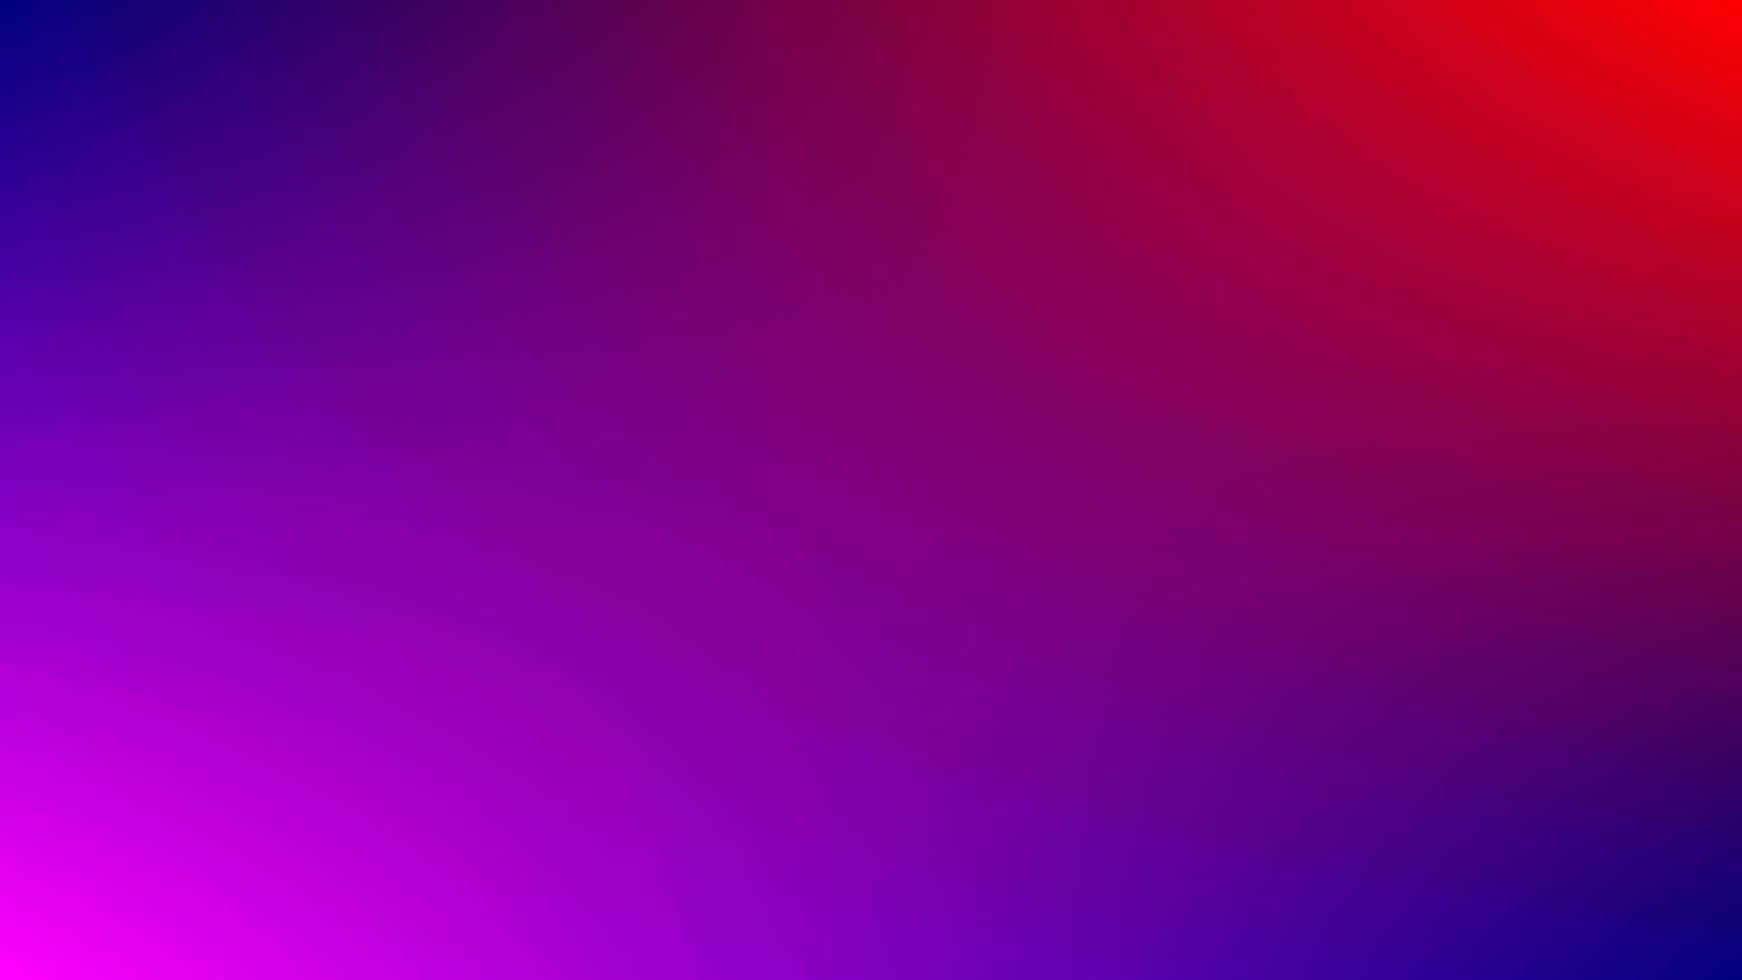 Dim Gradient Of Red And Purple Background